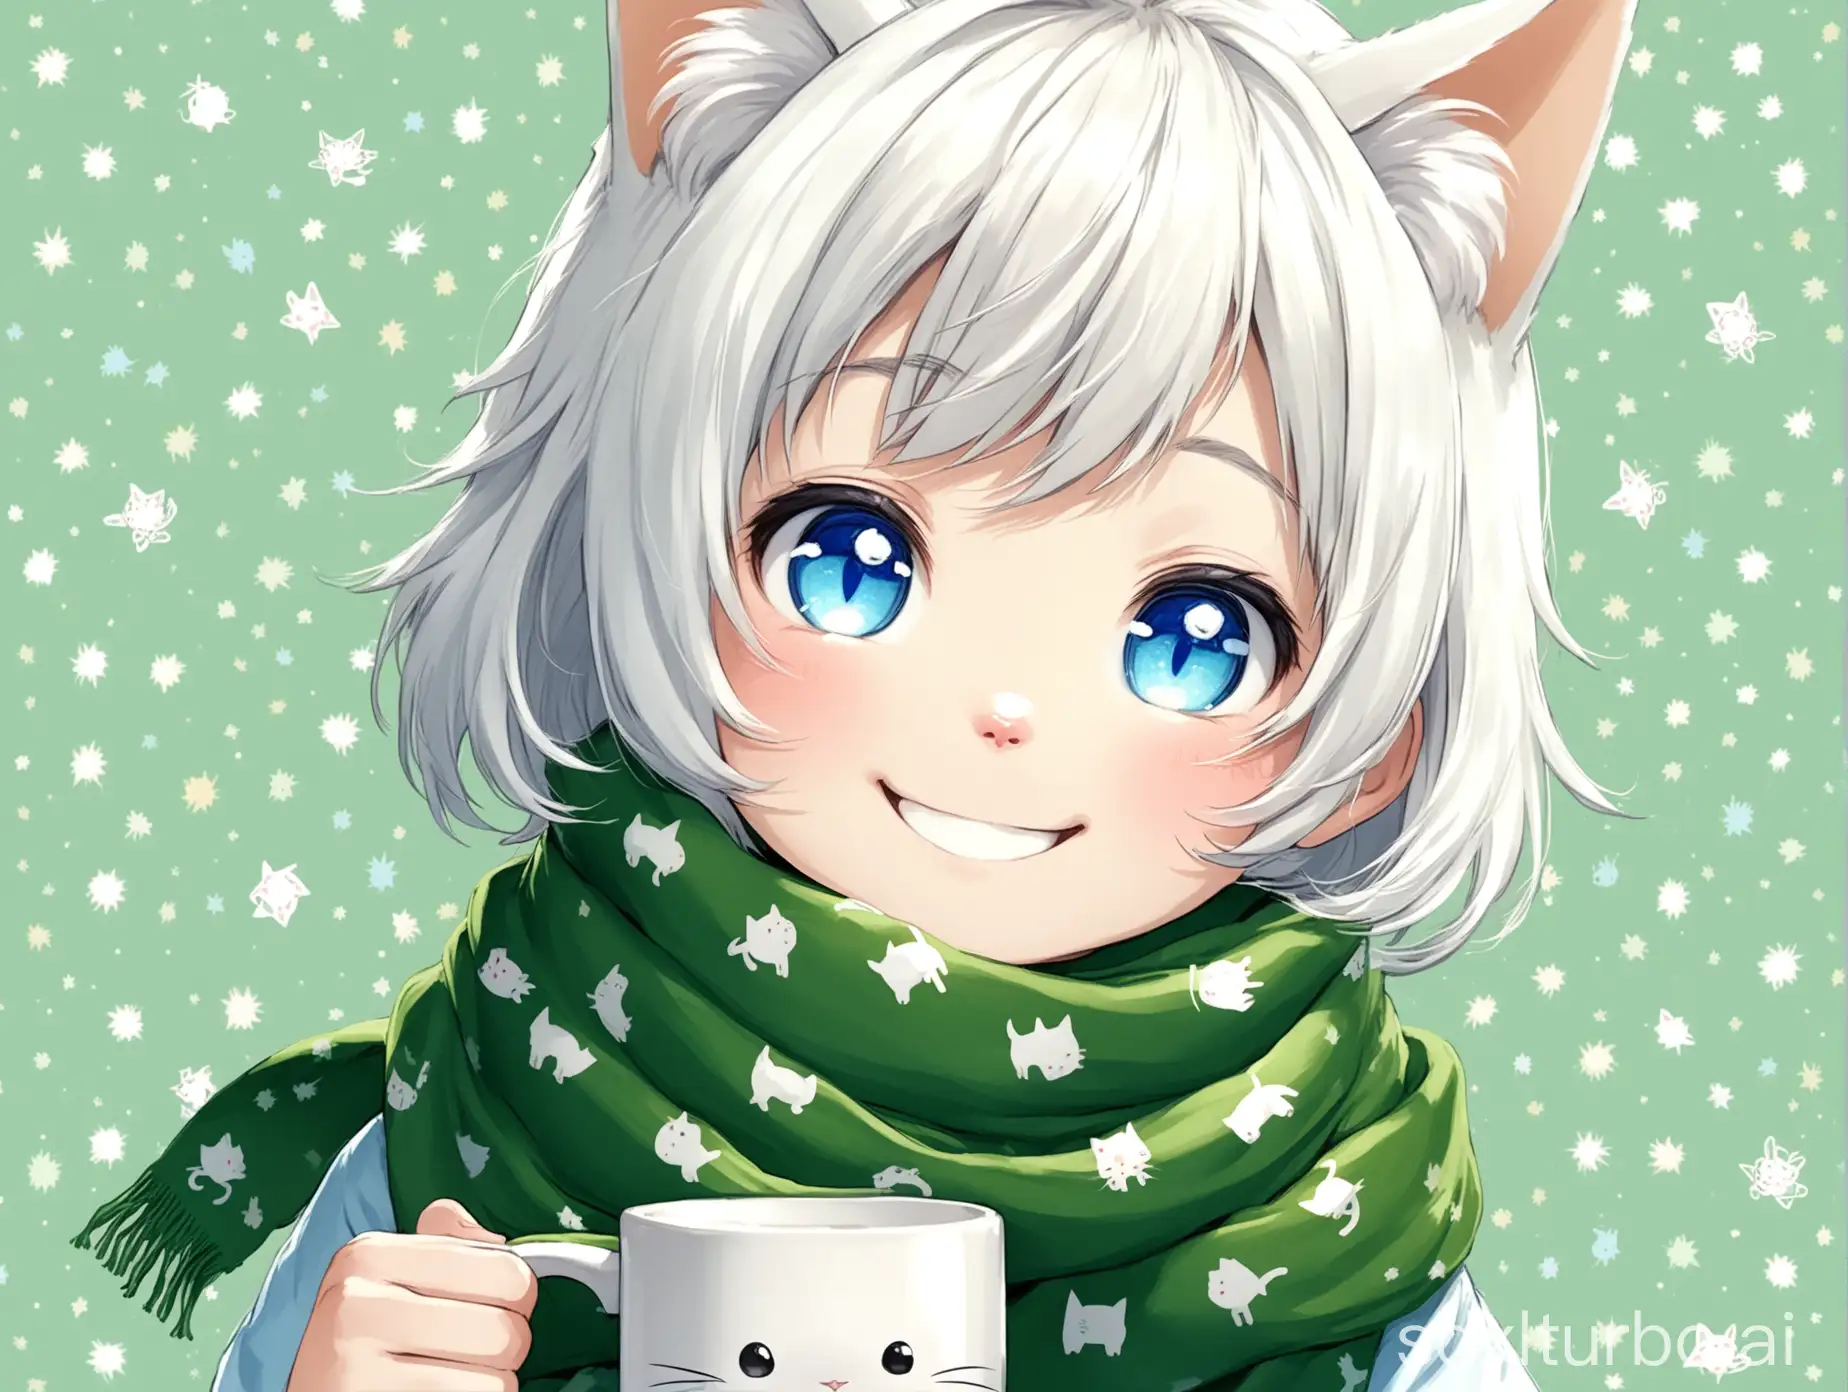 Joyful-Teenager-with-CatEared-Mug-WhiteHaired-Boy-Smiling-Happily-in-Green-Scarf